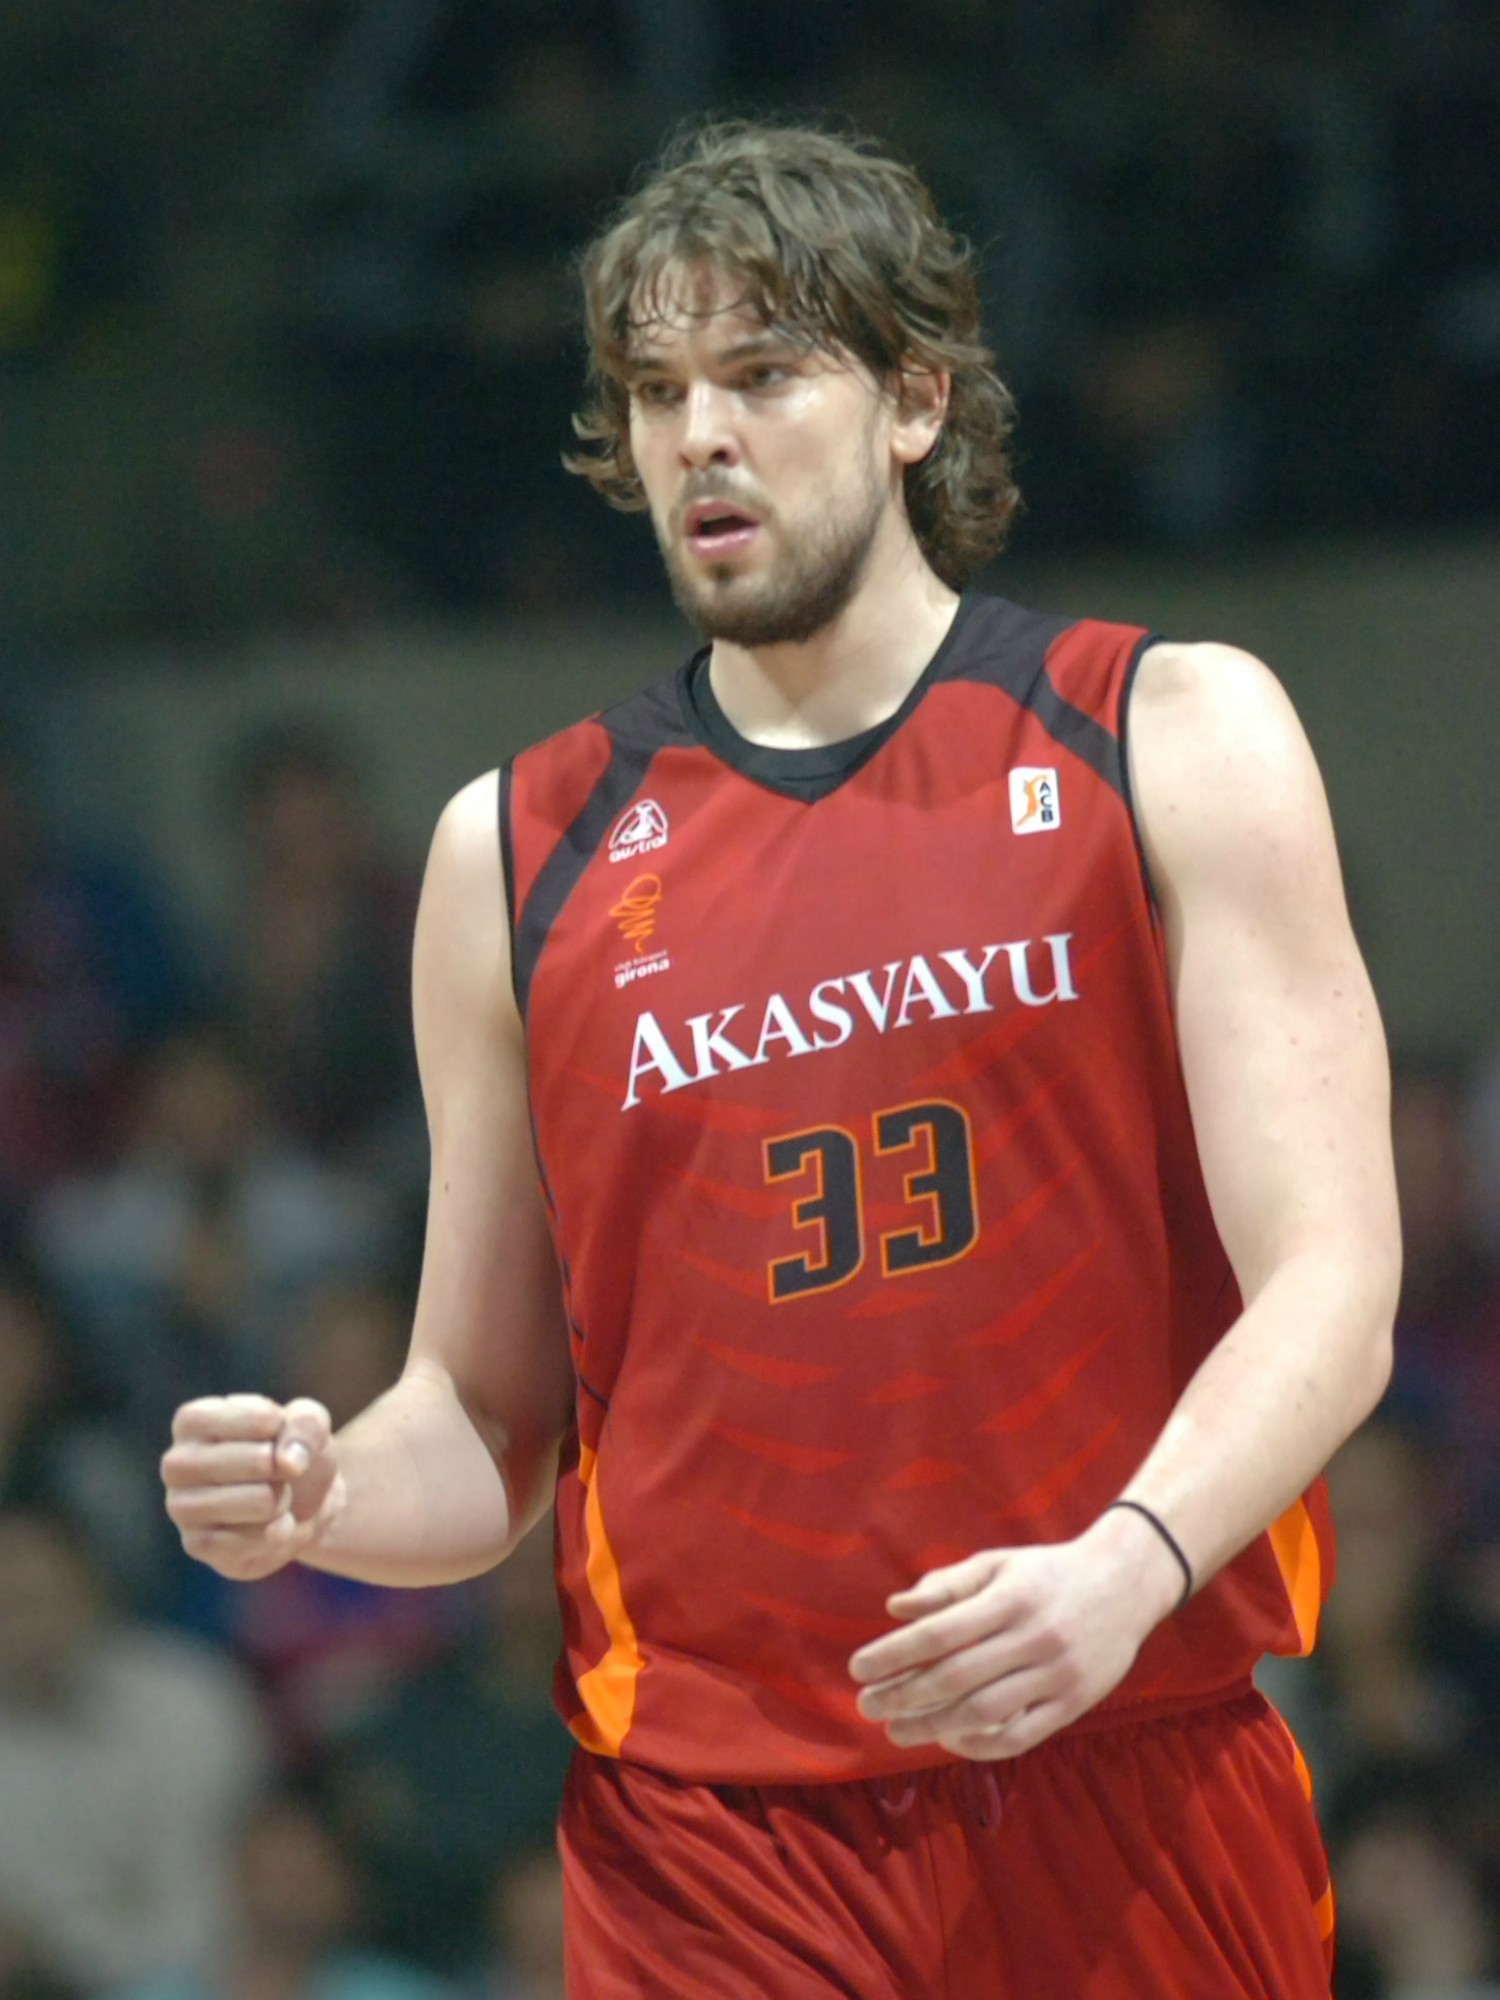 Marc Gasol, in a 2008 image with the Akasvayu.